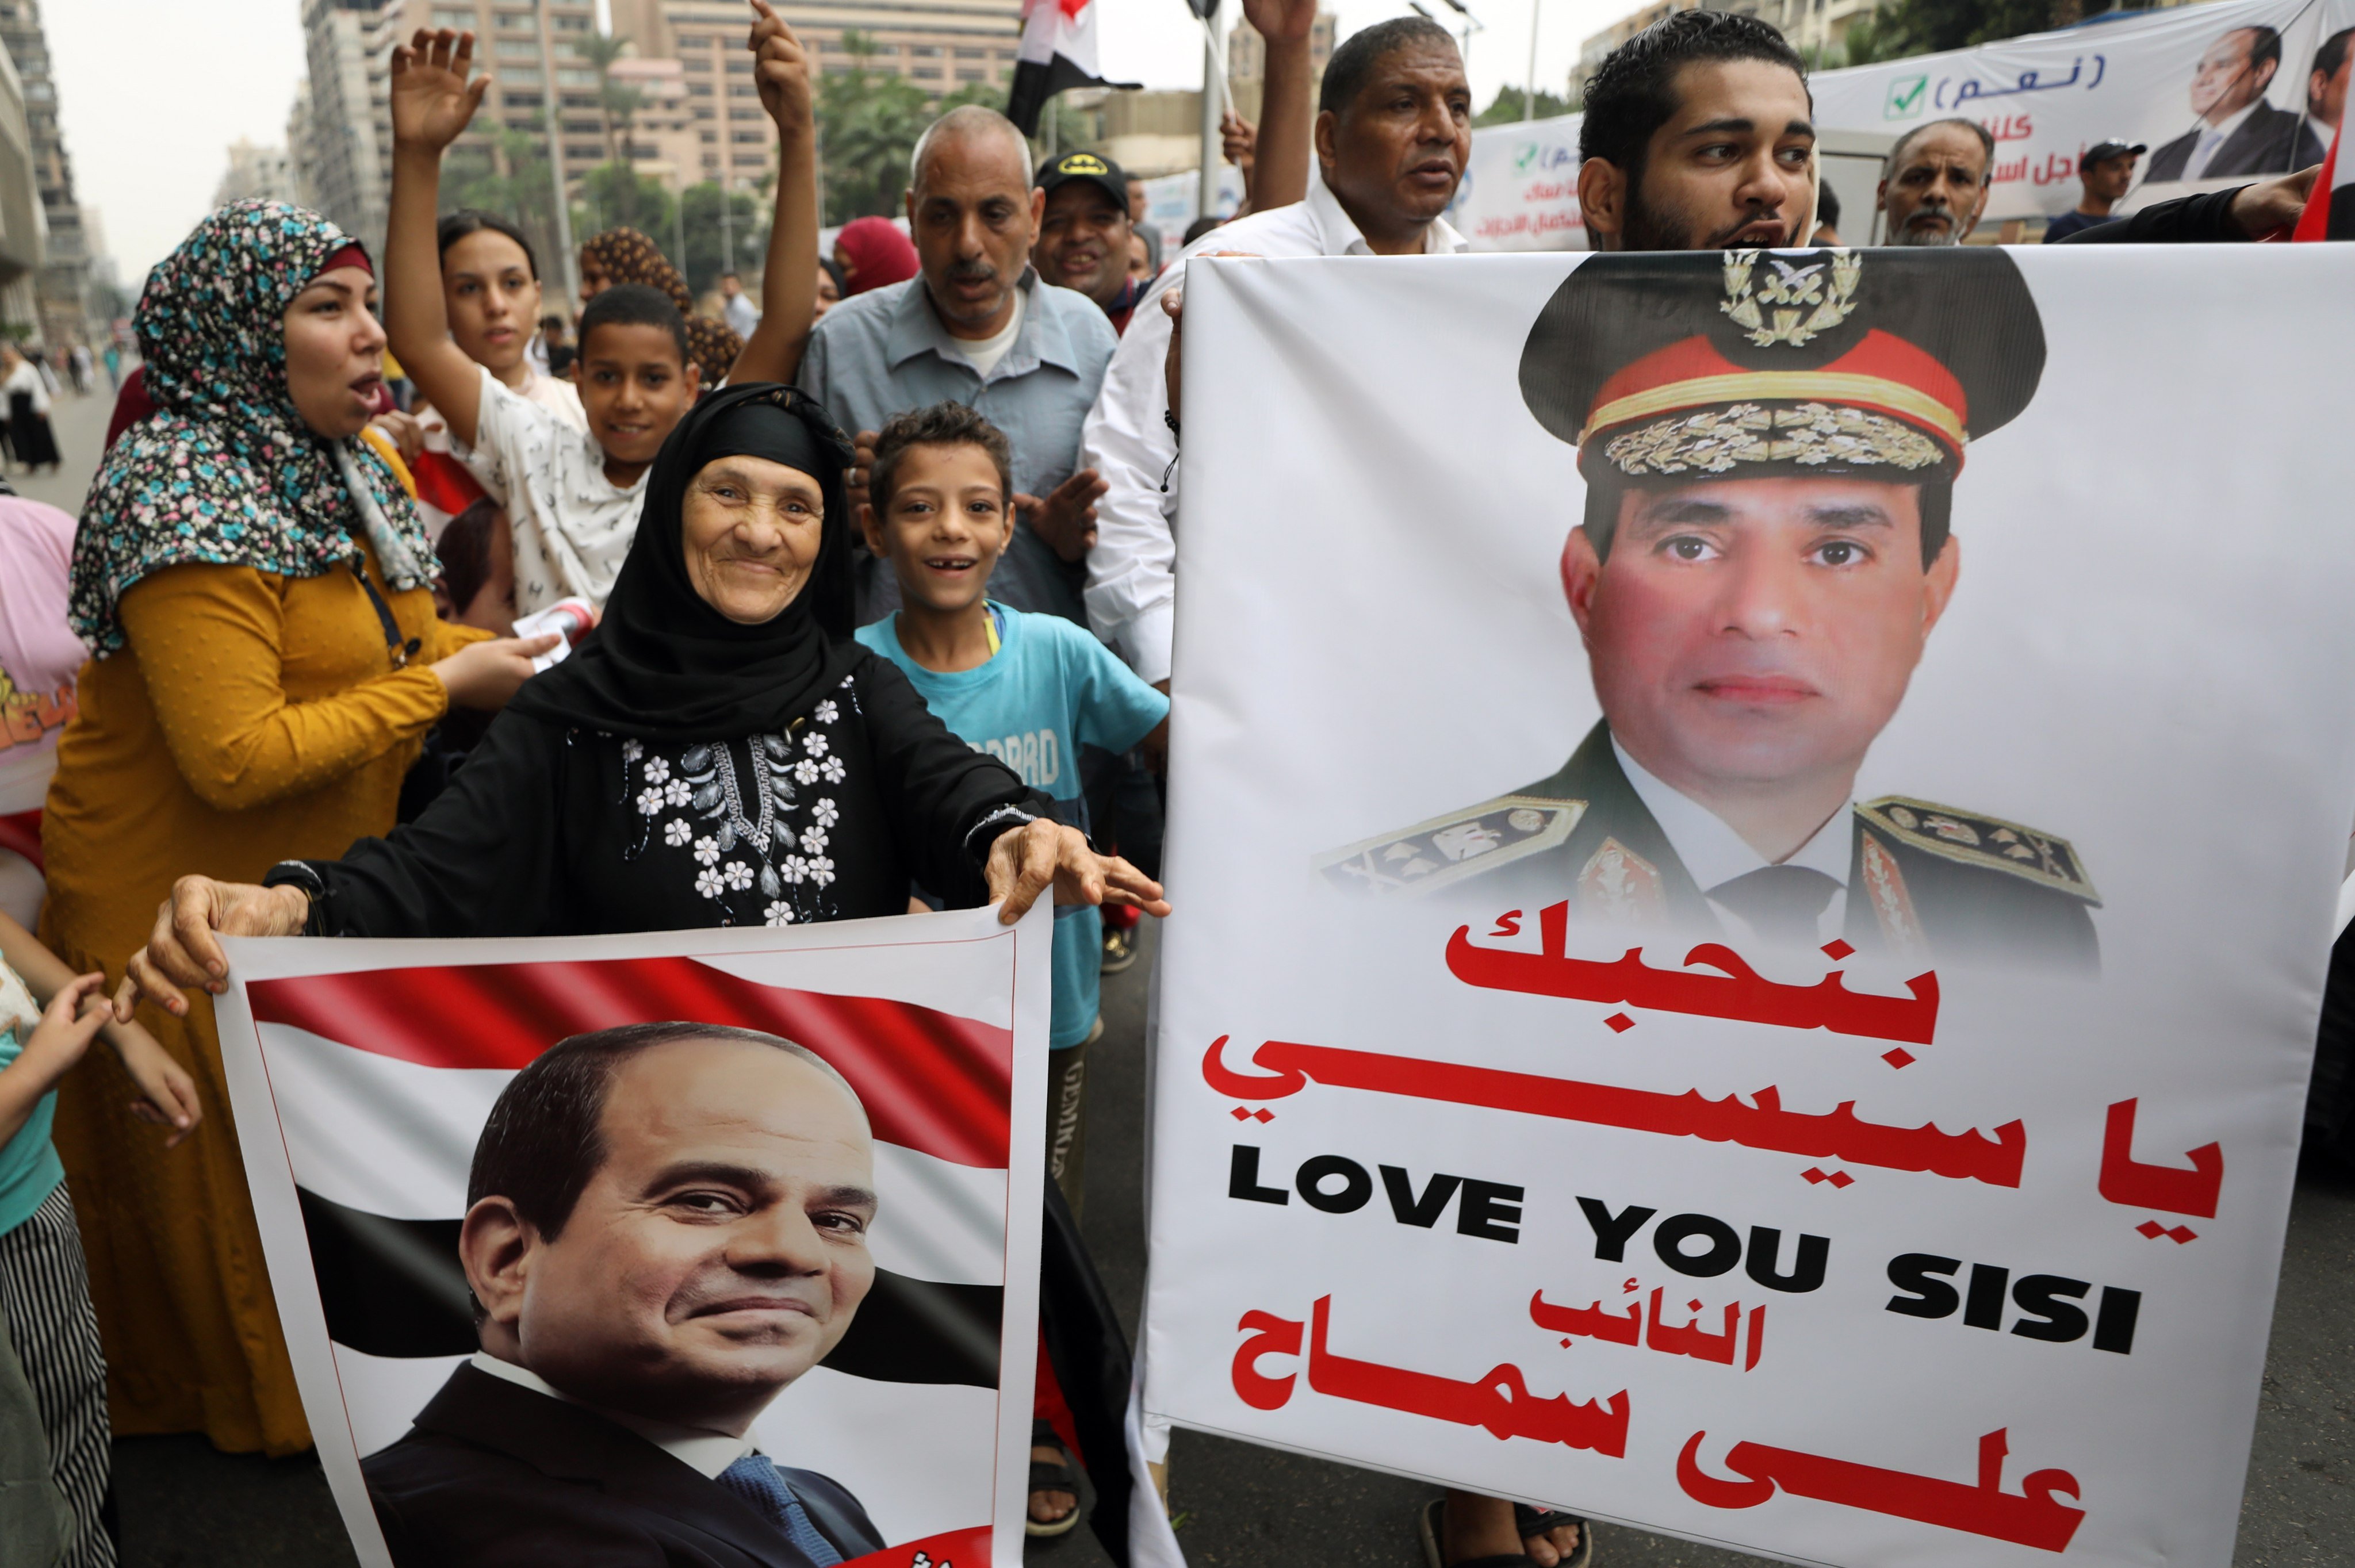 Supporters of Egyptian President Abdel-Fattah el-Sisi participate in a rally to back his candidacy in the country’s upcoming presidential election. Photo: EPA-EFE